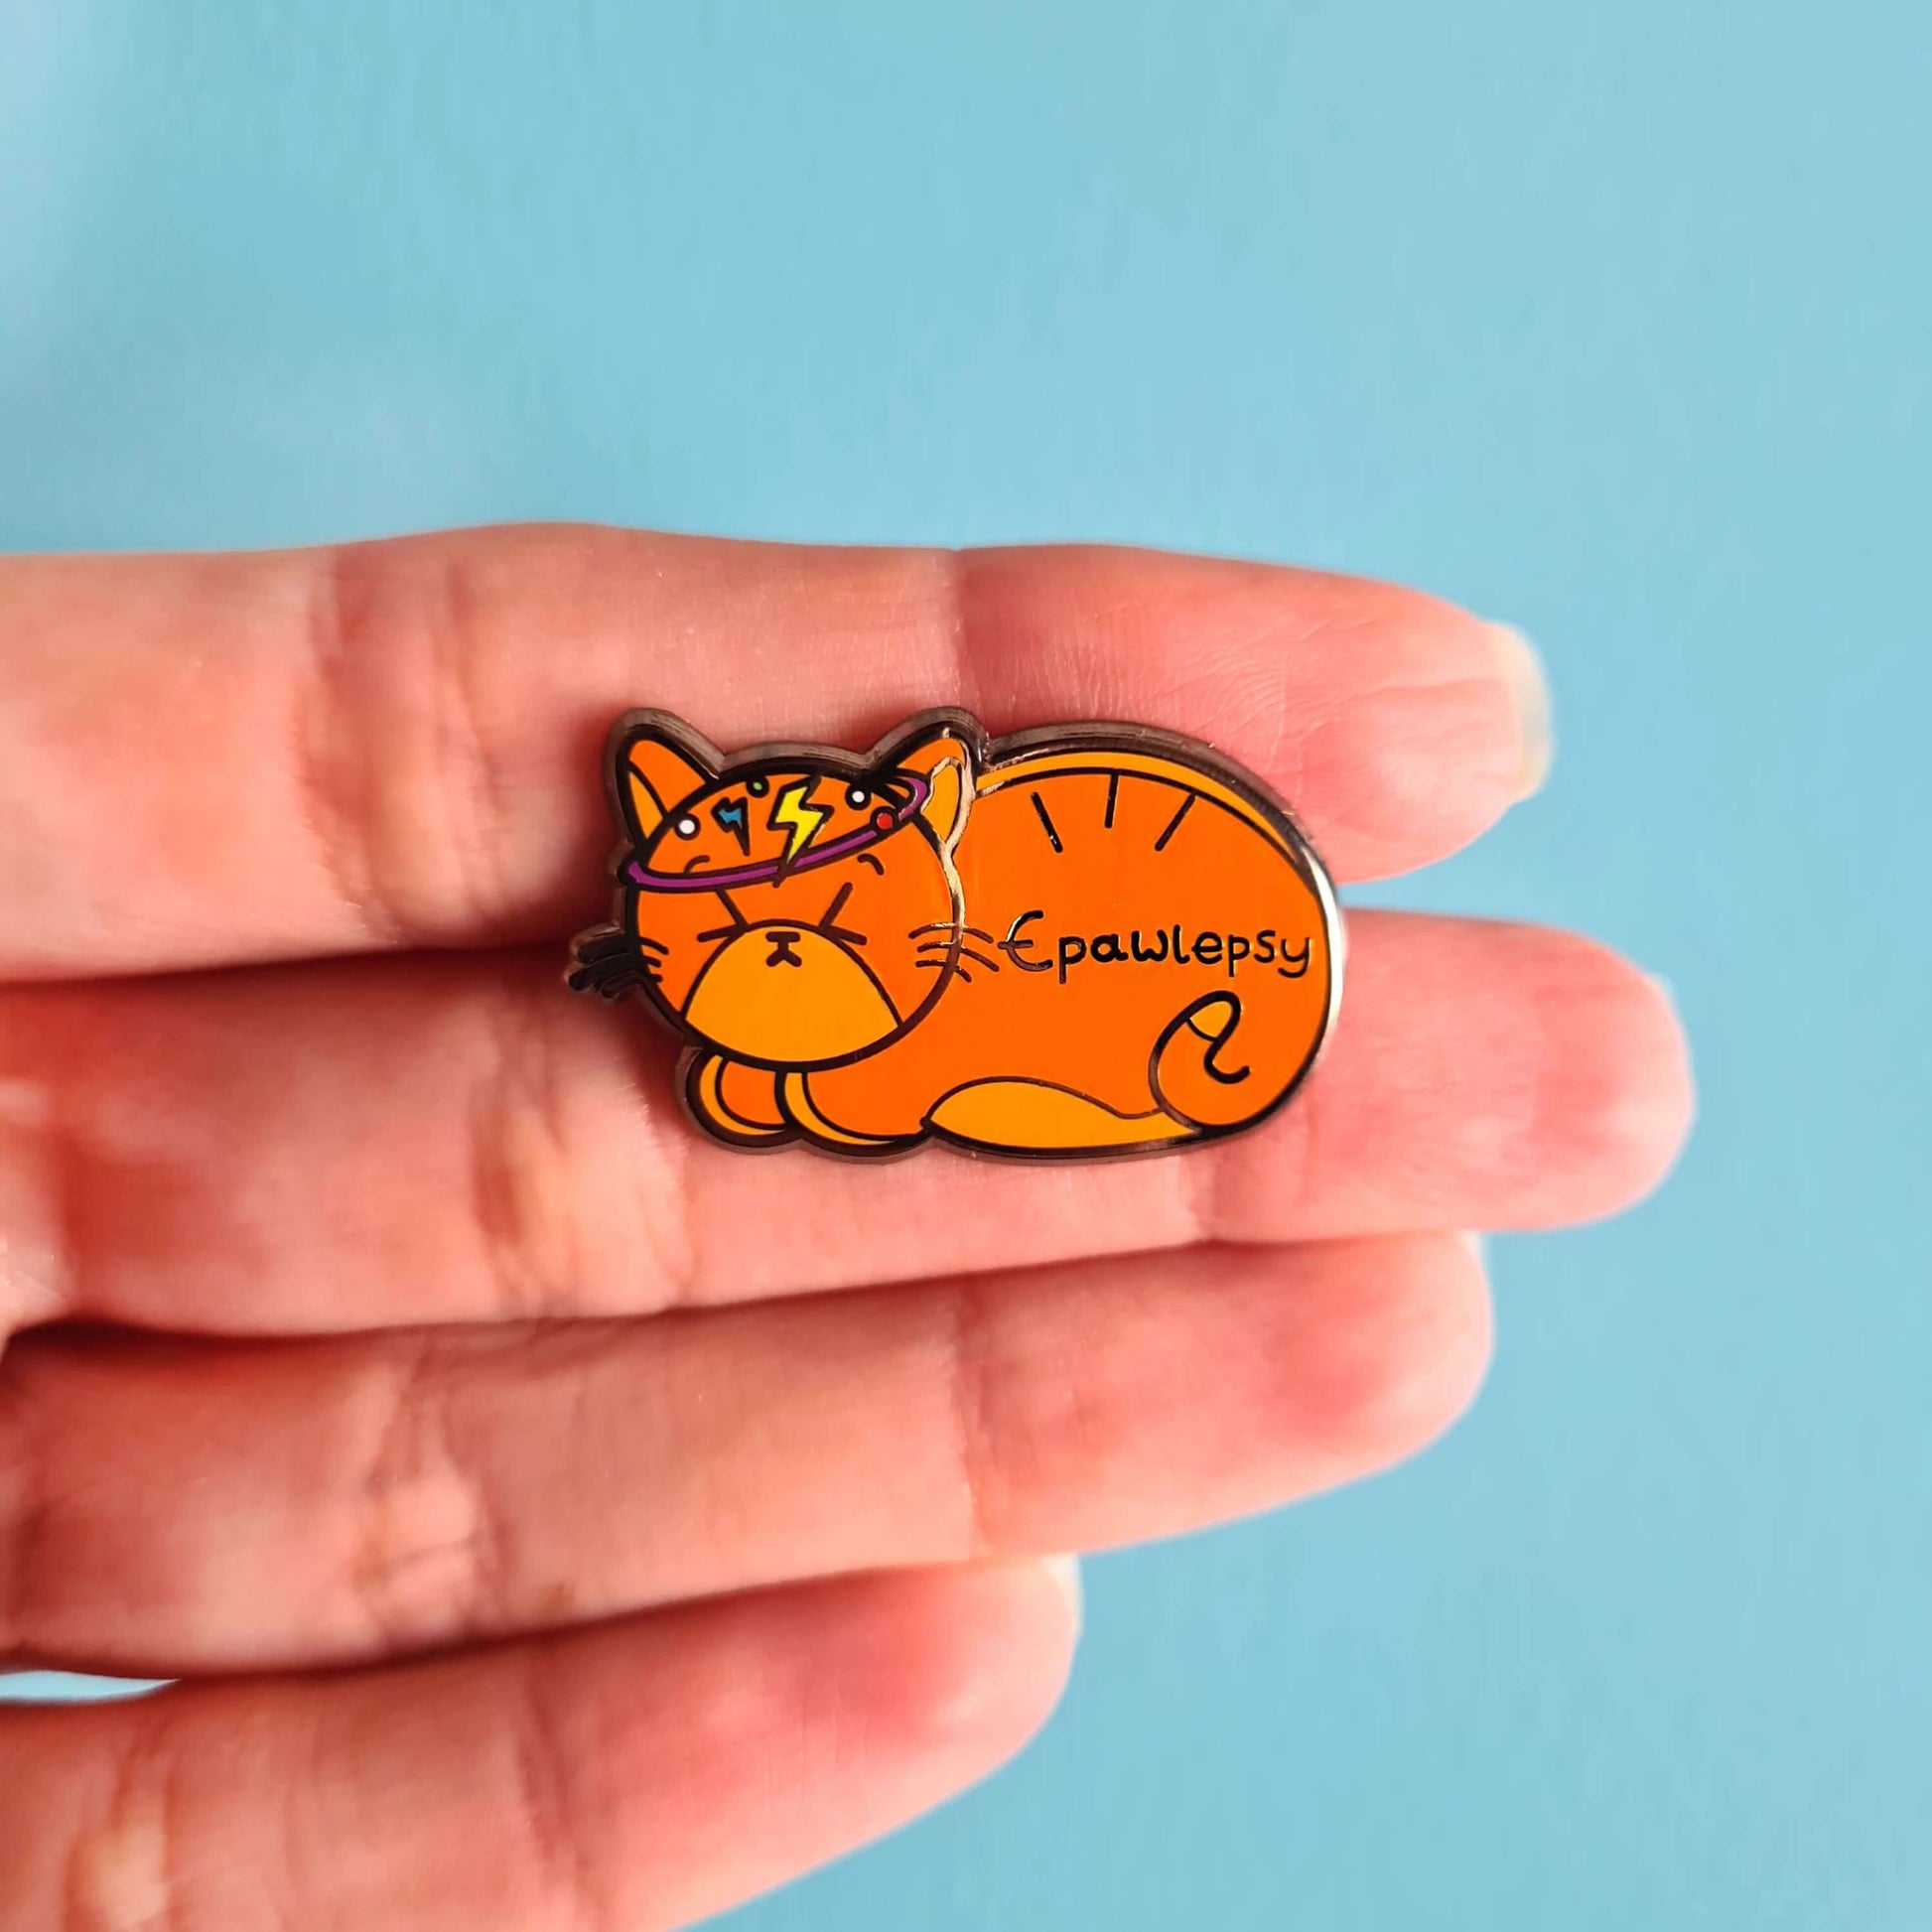 Epawlepsy Enamel Pin - Epilepsy shown on palm of hand on a blue background. The enamel pin is a ginger cat with eyes scrunched closed and symbols to represent a dizzy spell drawn across his head. Epawlepsy is written on the cats stomach. Enamel pin is designed to raise awareness for epilepsy